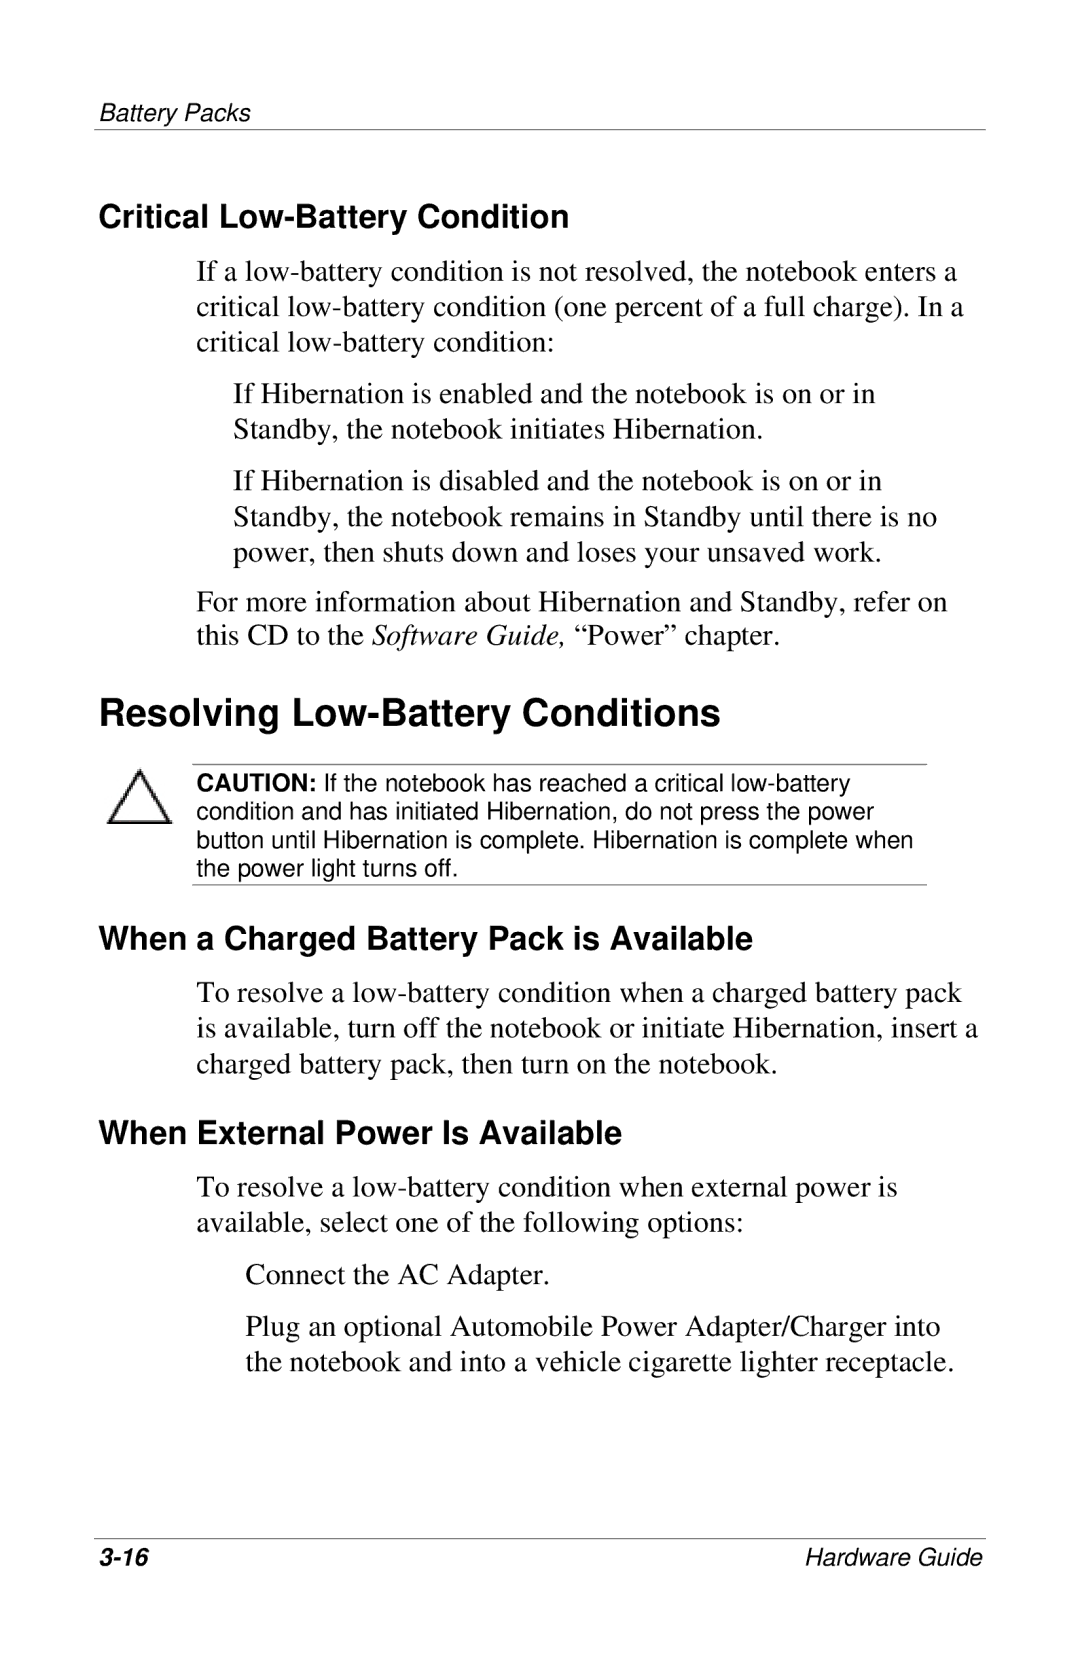 HP 309971-001 manual Resolving Low-Battery Conditions, Critical Low-Battery Condition 